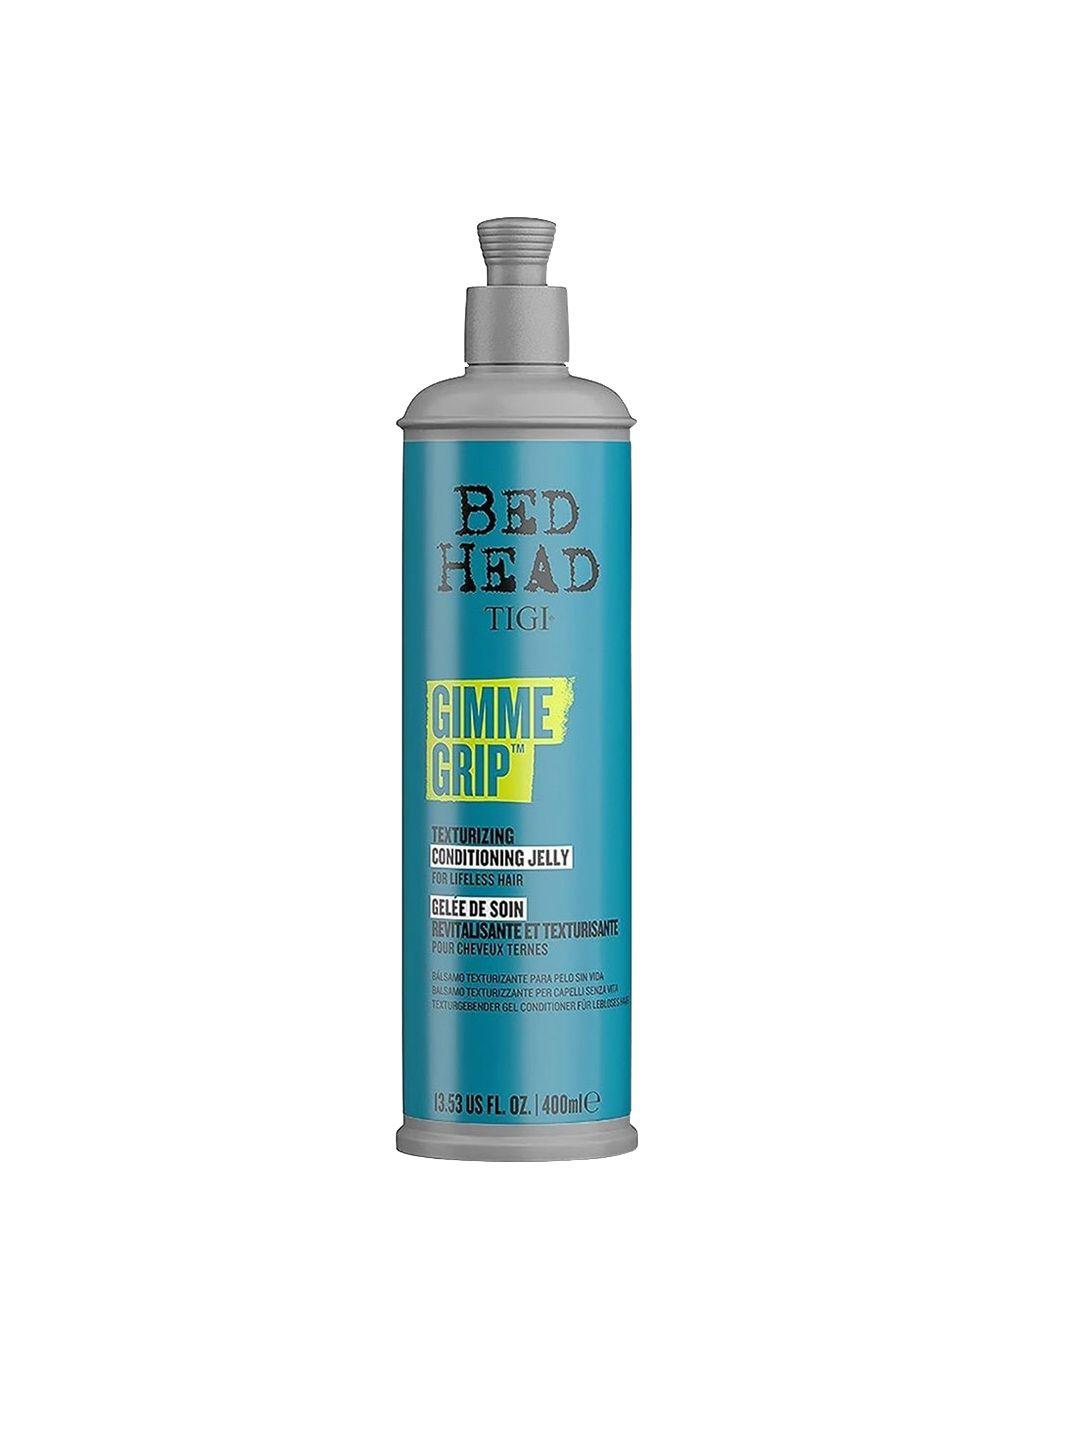 tigi-bed-head-gimme-grip-texturizing-conditioning-jelly-for-lifeless-hair---400-ml